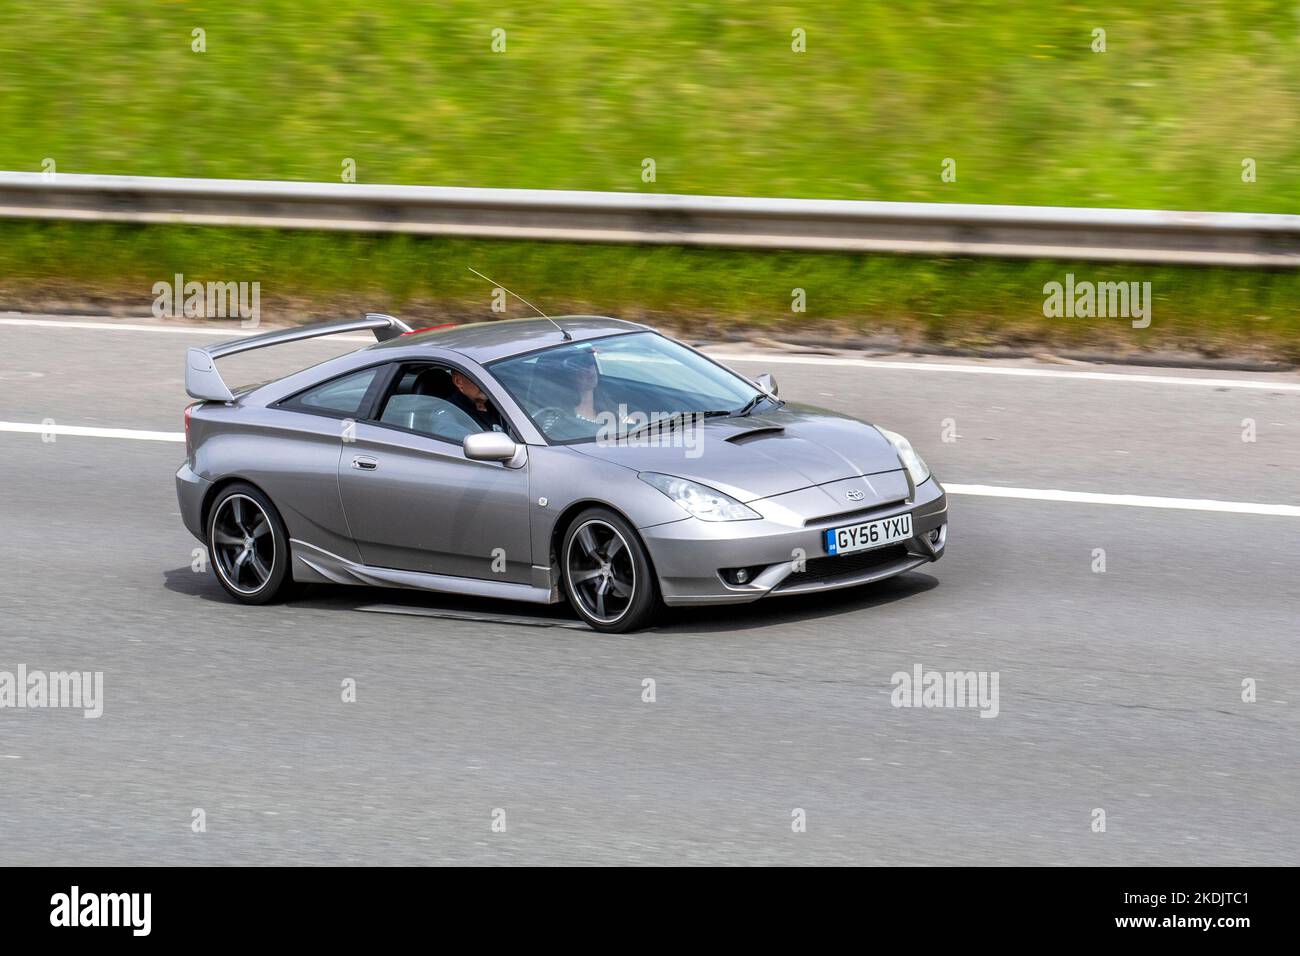 2006 Silver TOYOTA CELICA Vvti GT 2dr coupe travelling on the M6 motorway, UK Stock Photo